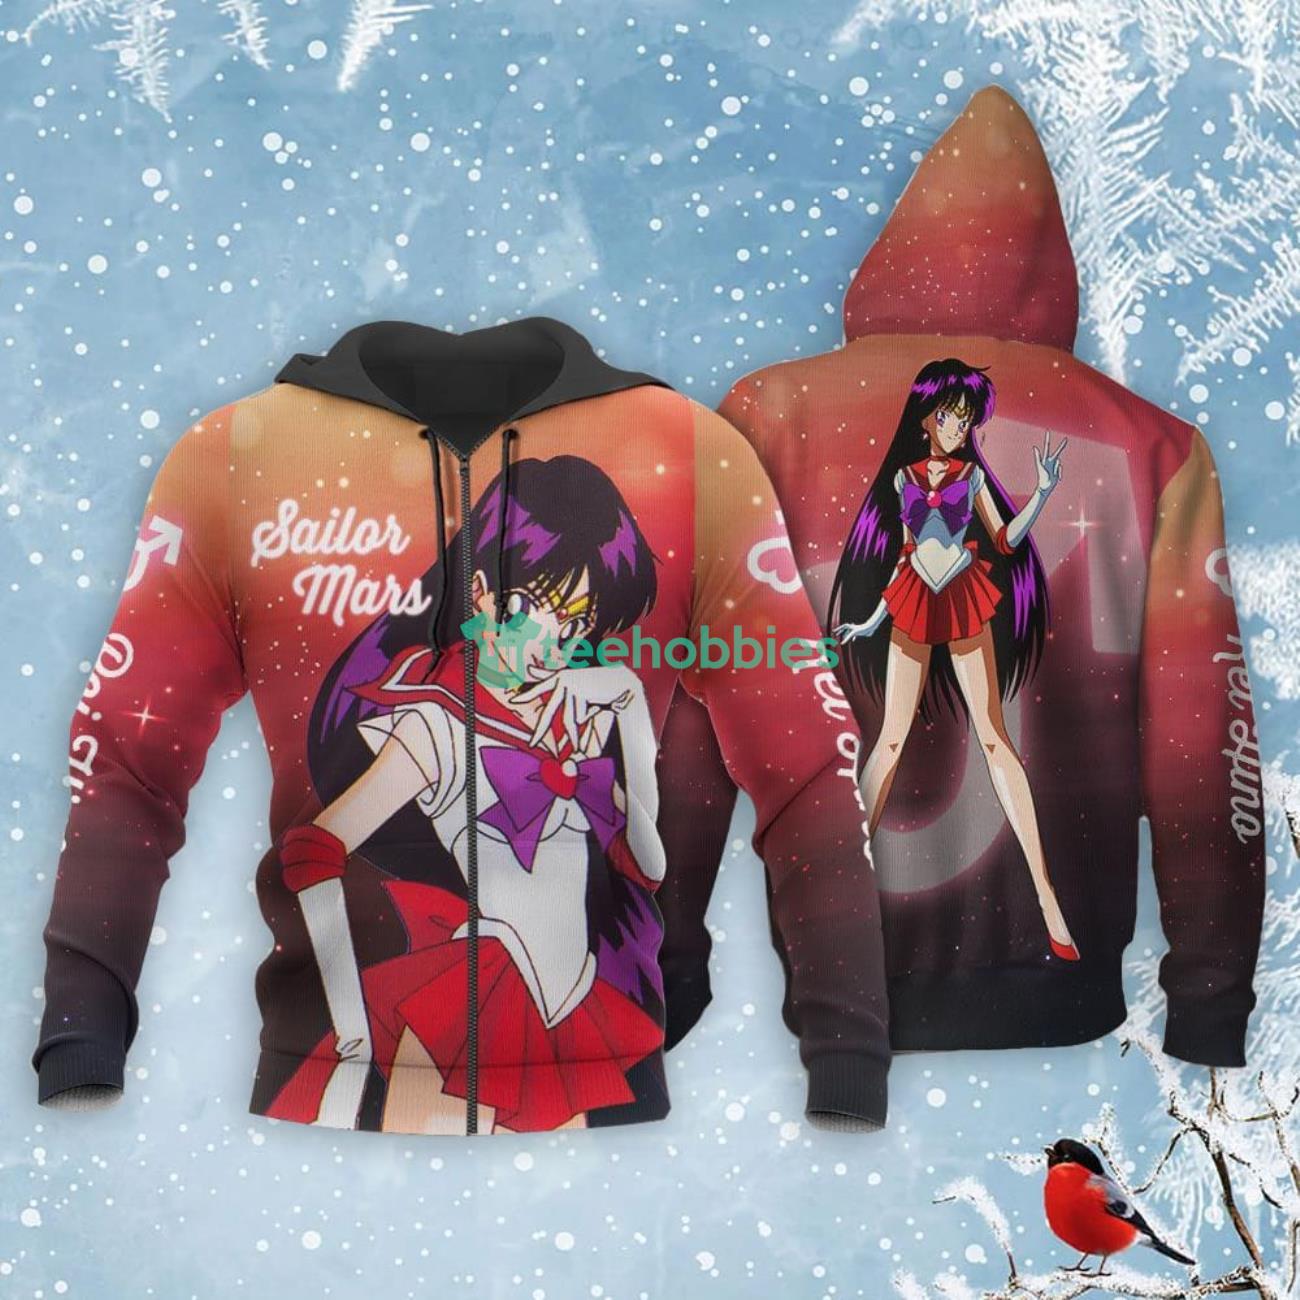 Sailor Mars Rei Hino All Over Printed 3D Shirt Sailor Moon Anime Fans Product Photo 1 Product photo 1